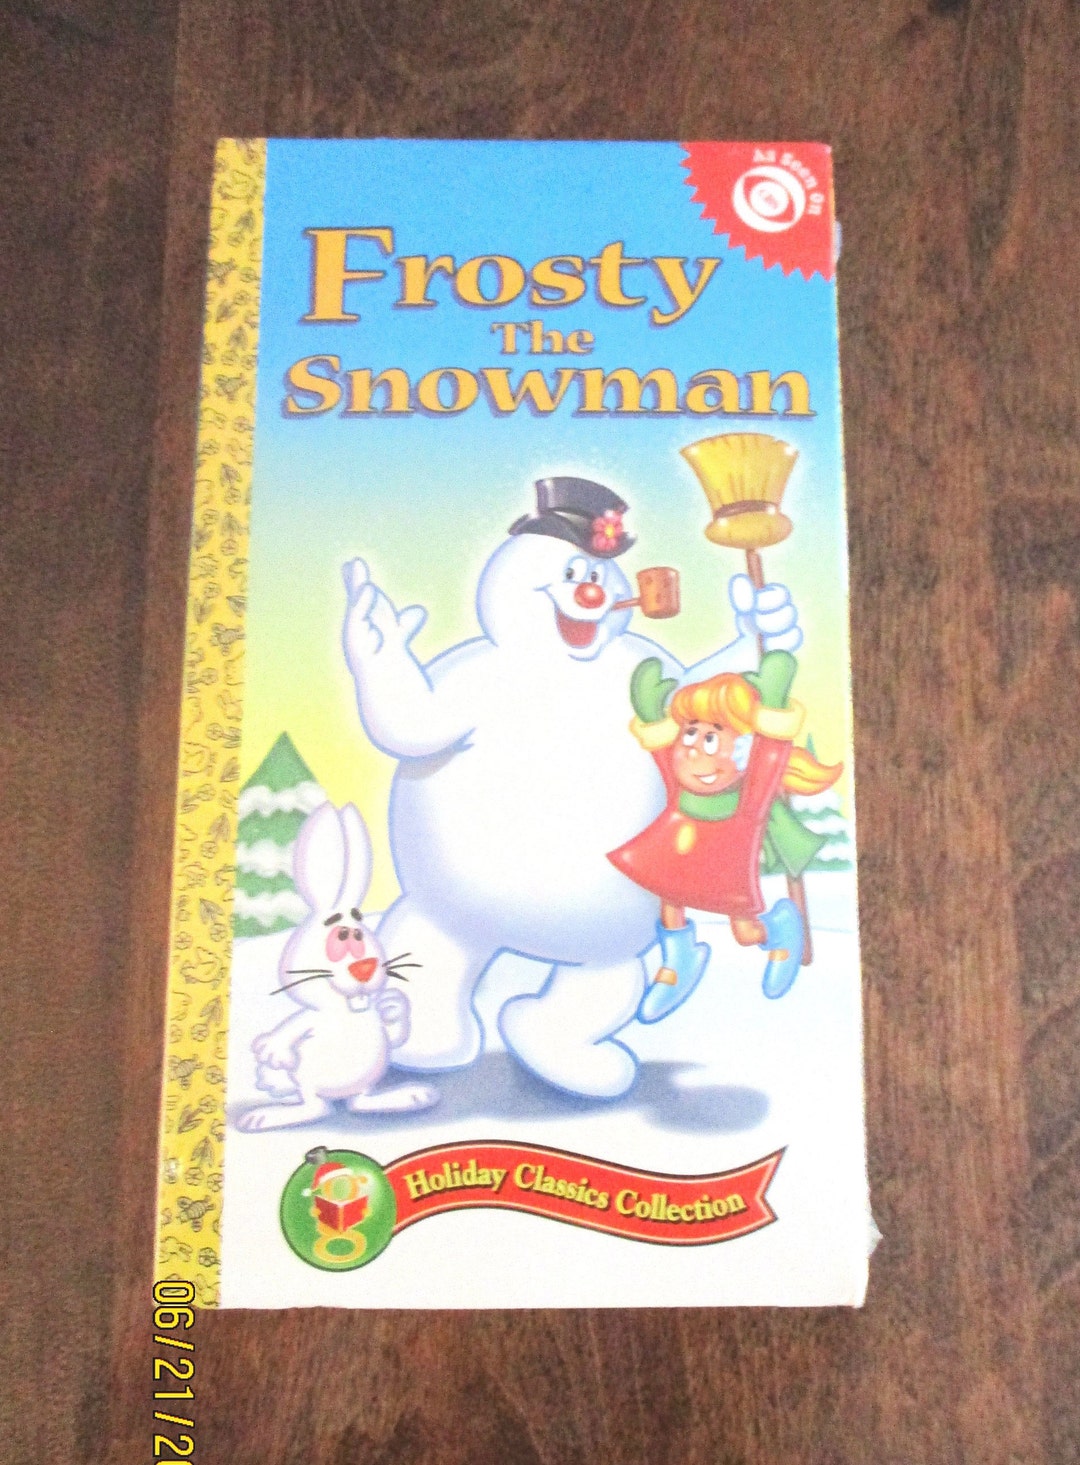 Frosty the Snowman VHS 1998 Jimmy Durante Jackie Vernon - Etsy